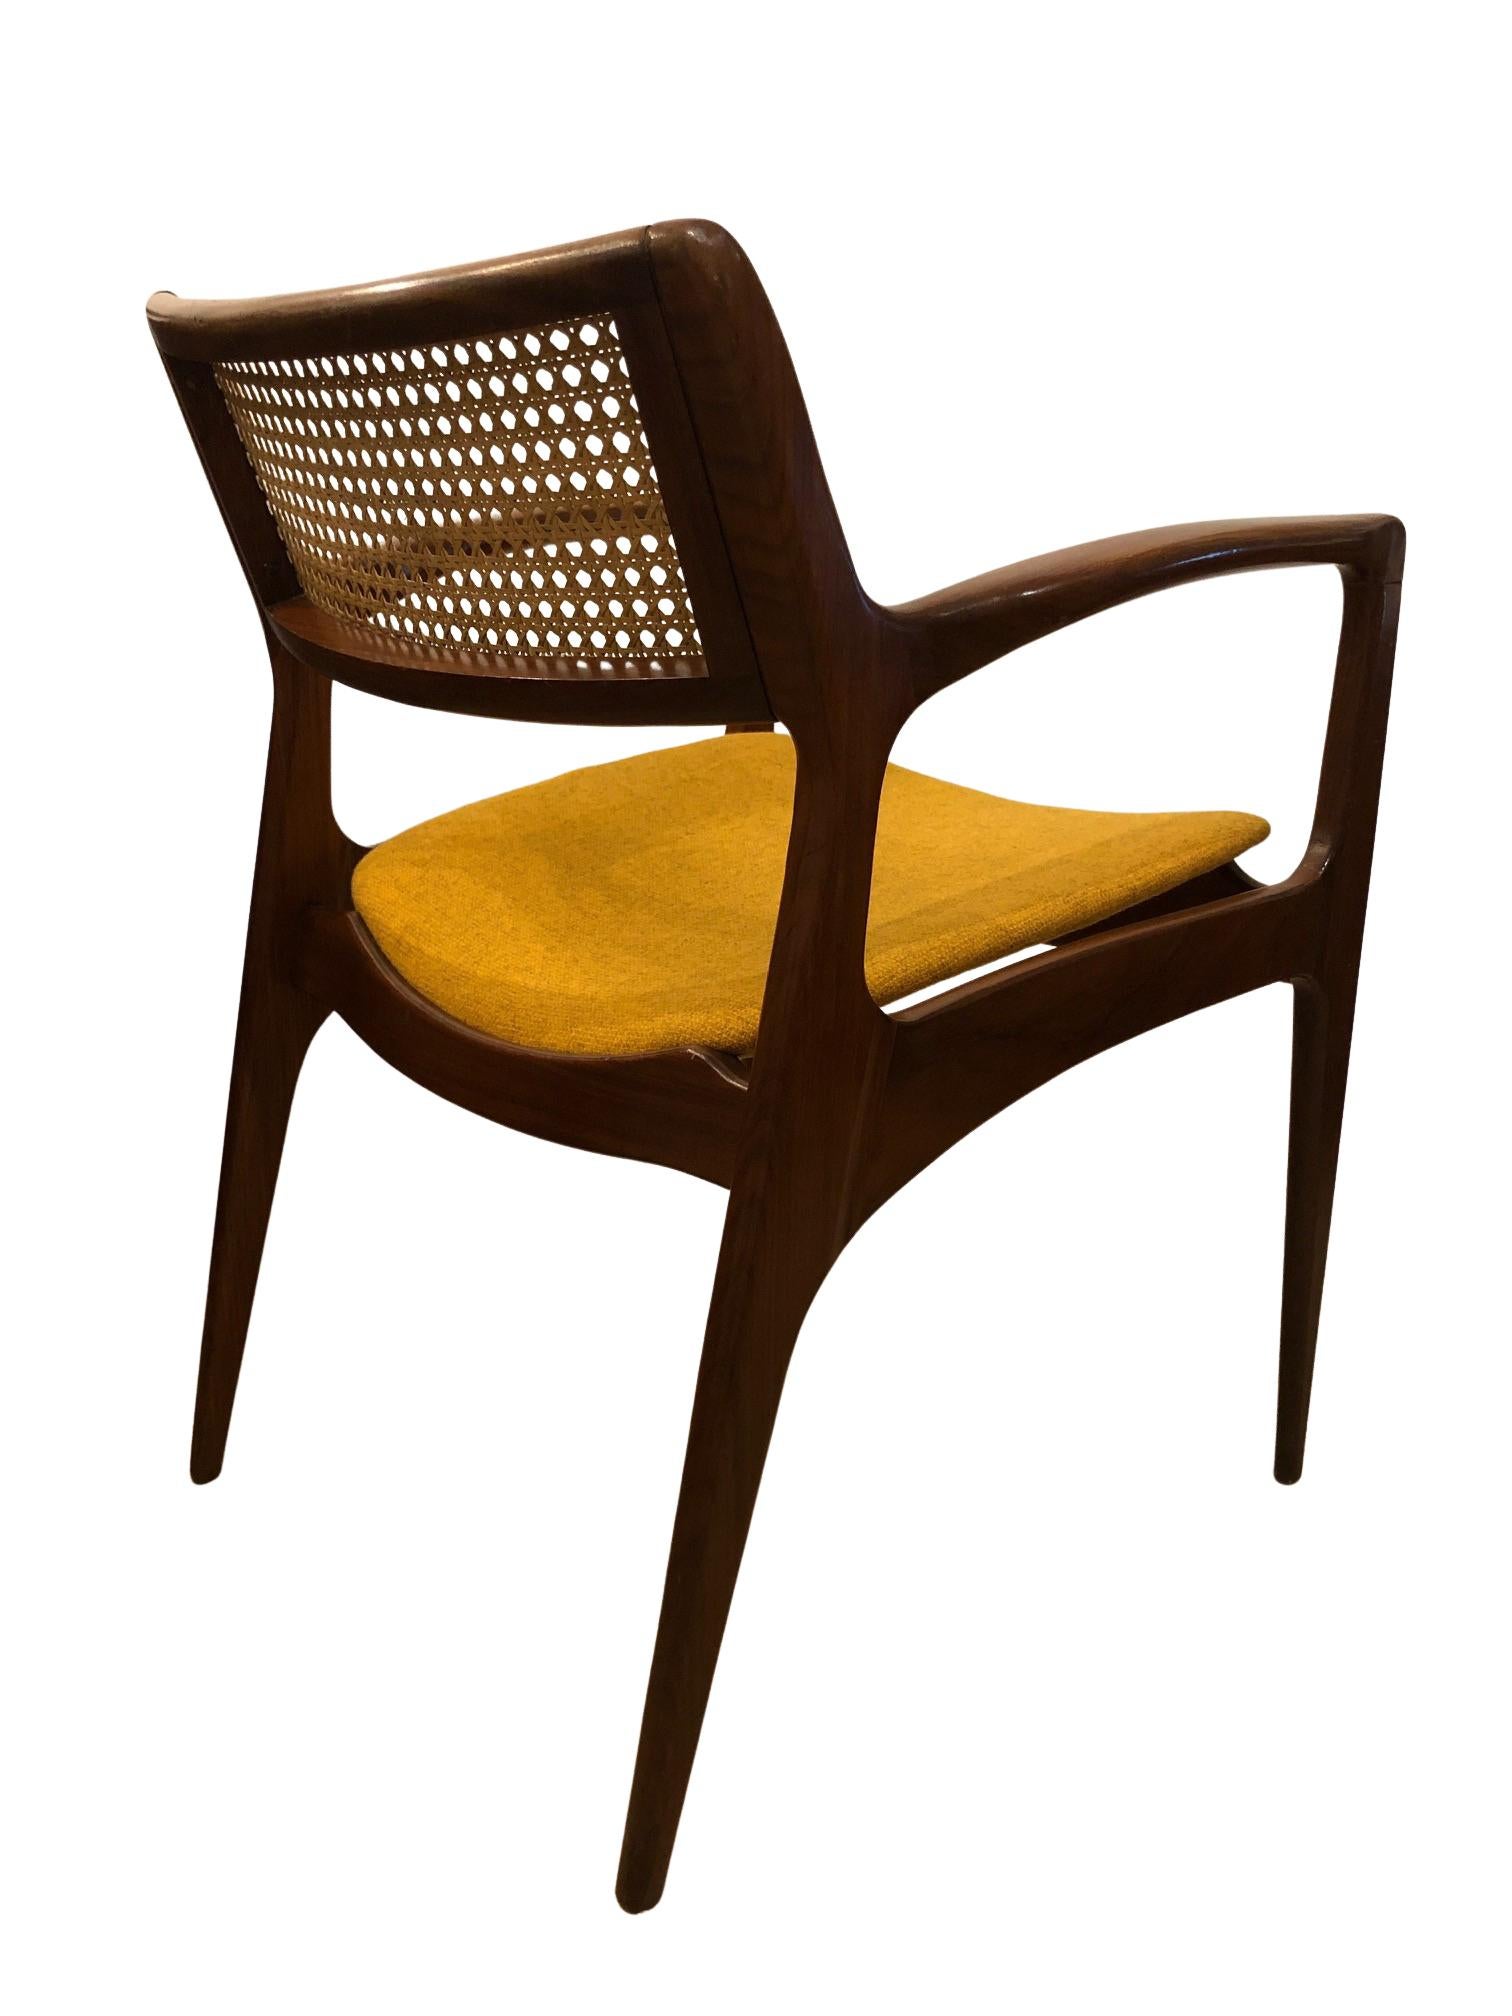 Set of chairs, model GFM-120 appears extremely rarely on the antiquarian market. 

It was designed by Edmund Homa, manufactured by Goscinska Furniture Factory in Poland in the 1960s. Professor Edmund Homa was Polish architect, designer of industrial